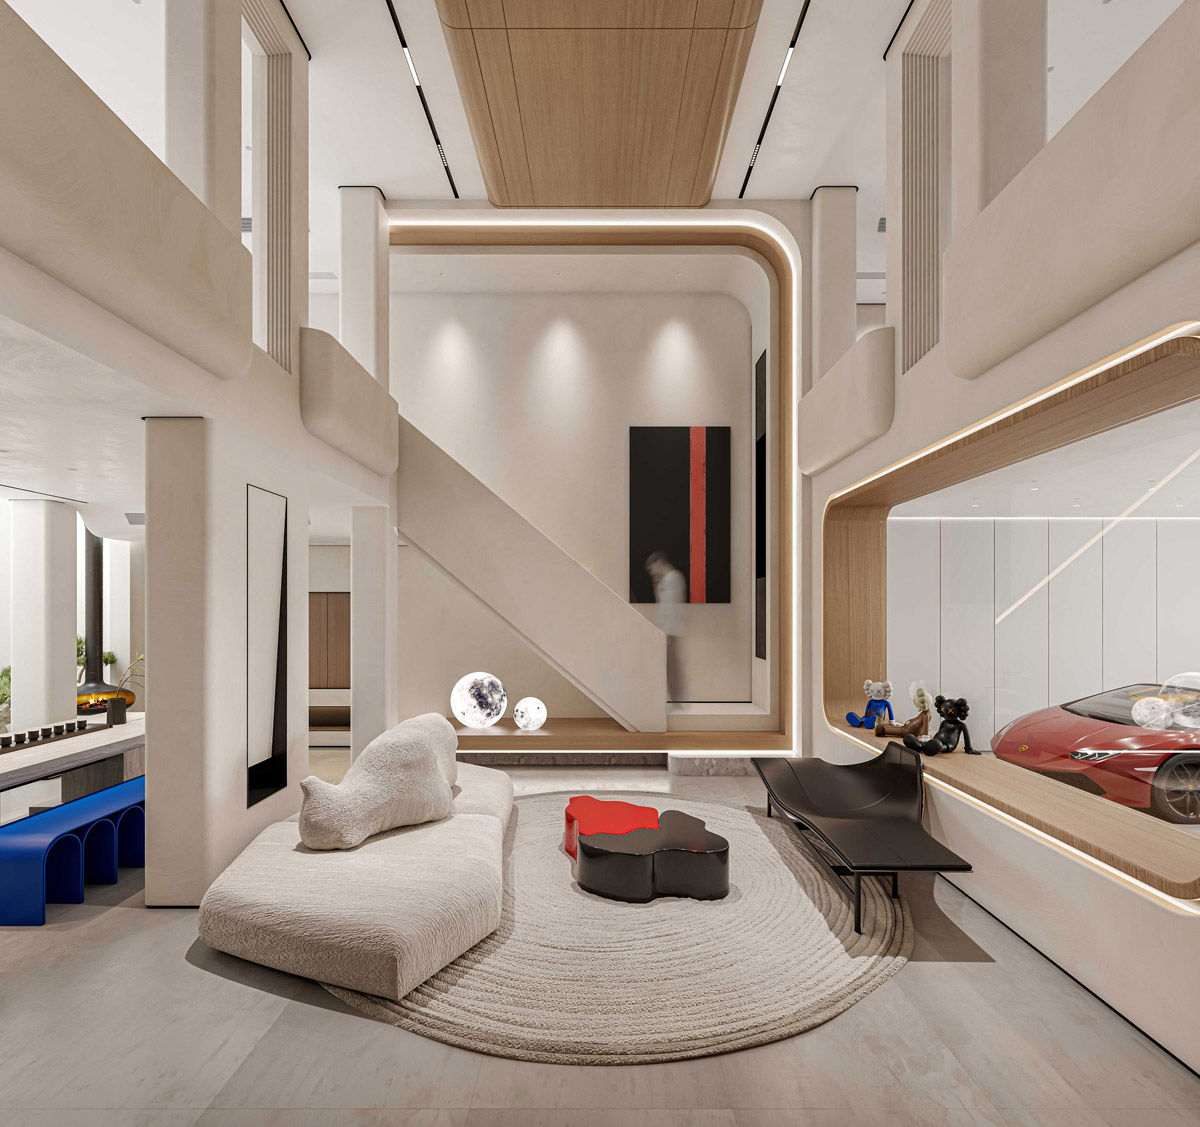 A closer look at a futuristic Chinese family home with eye-catching accent pieces, unique furniture, modern sculptures, a sensational home entertainment room and an elder room bit.ly/3Tdtzhy 

#homedesign #ideasforhome